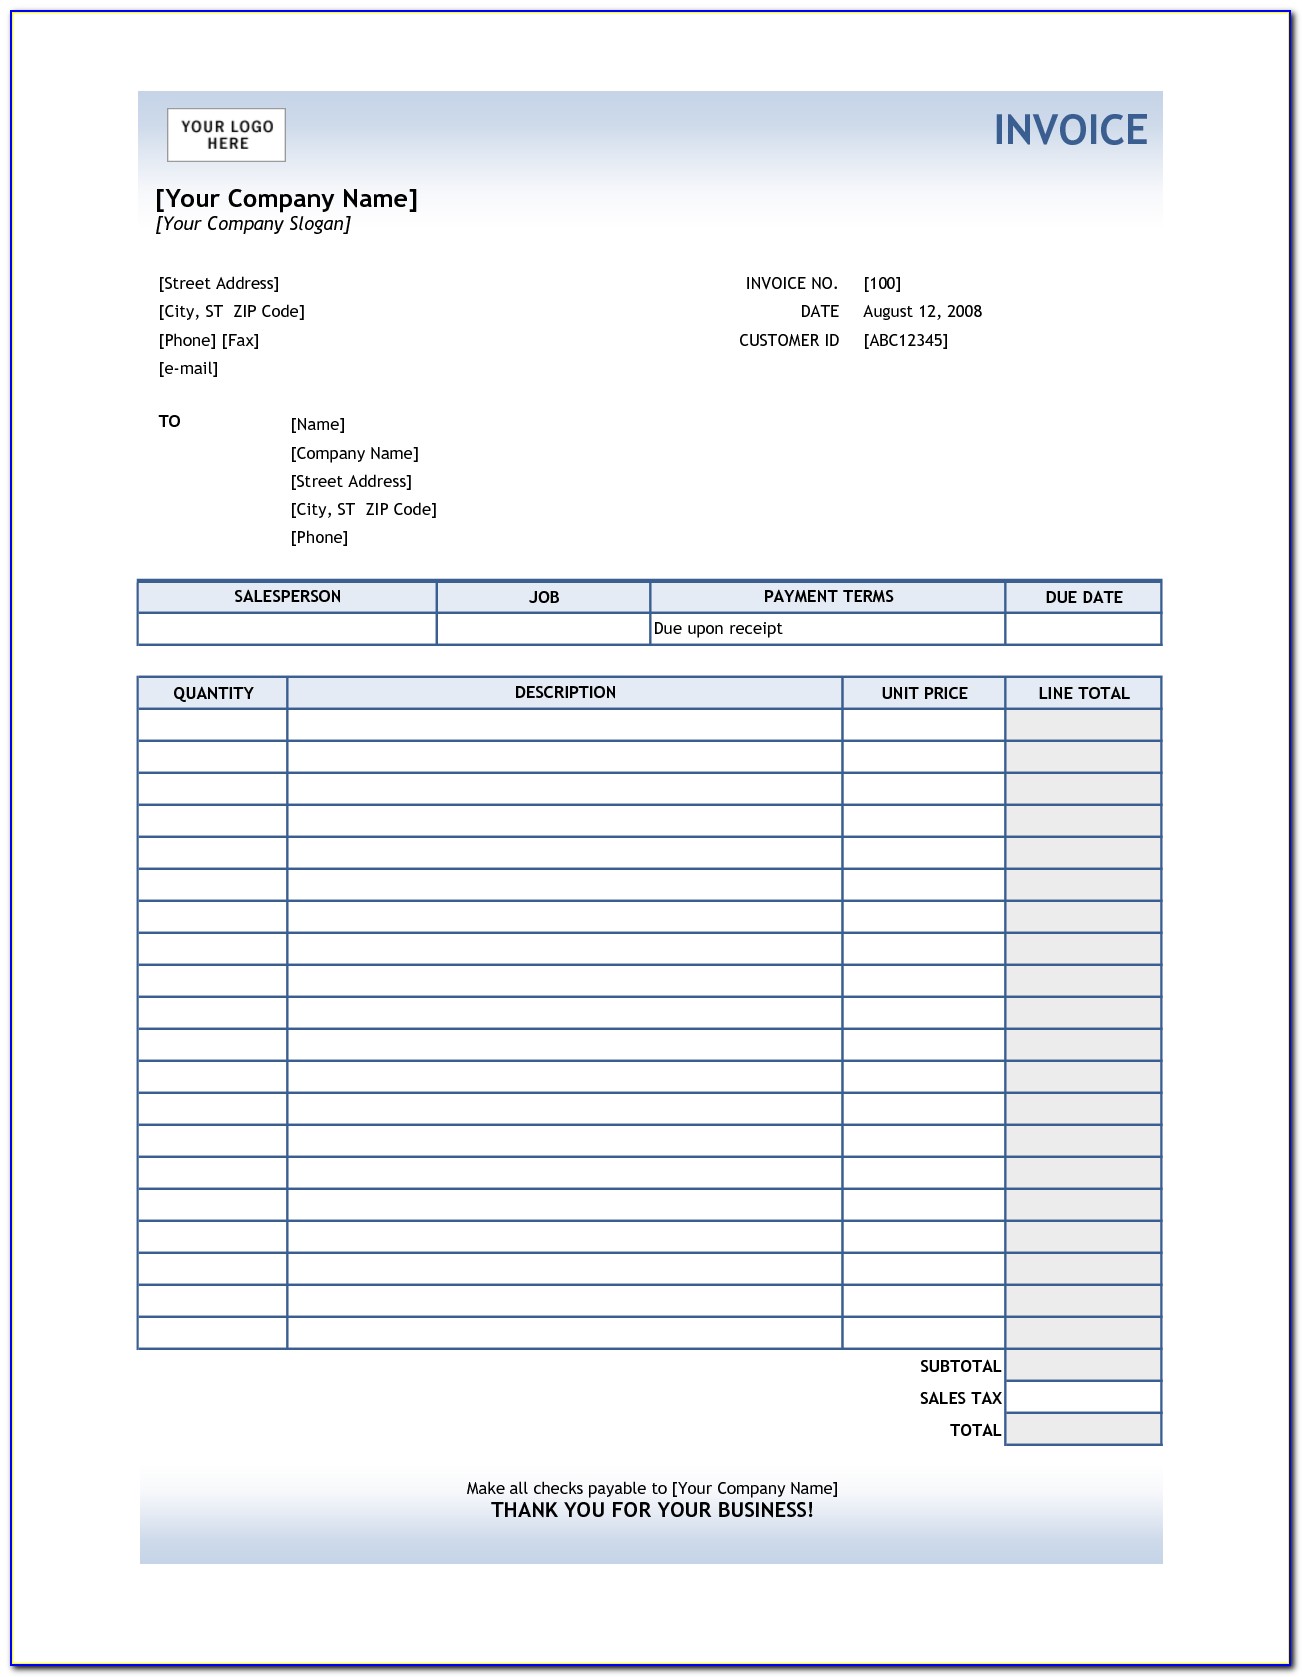 invoice-template-for-hours-worked